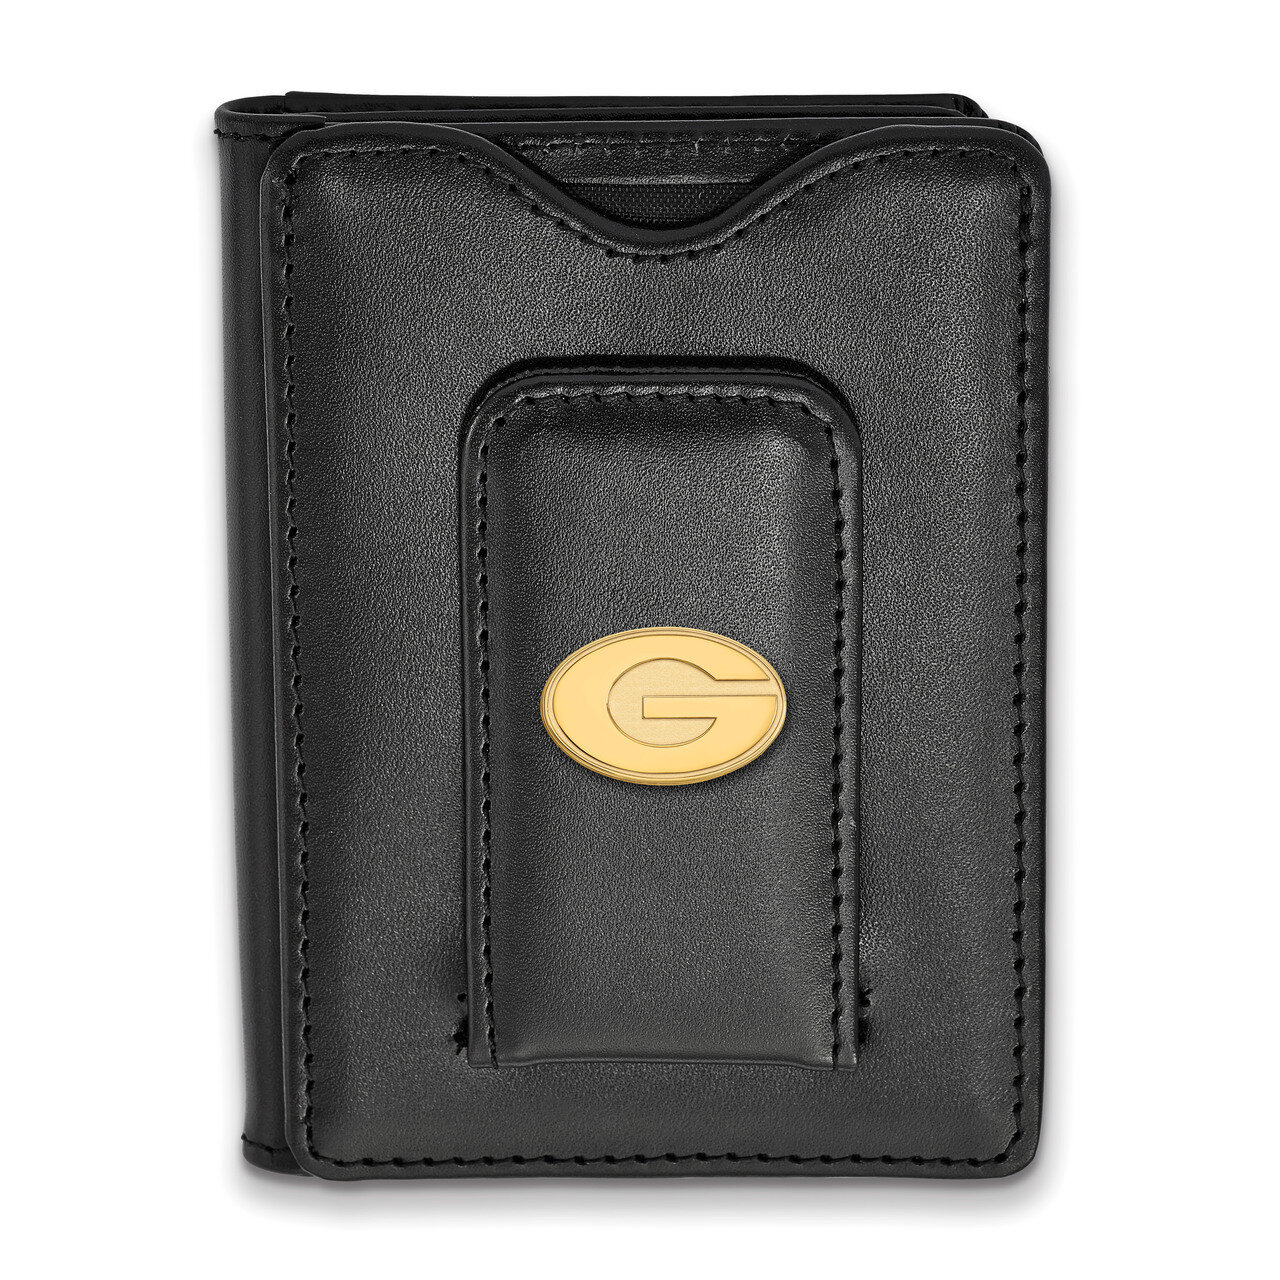 University of Georgia Black Leather Wallet - Gold-plated on Silver GP013UGA-W1